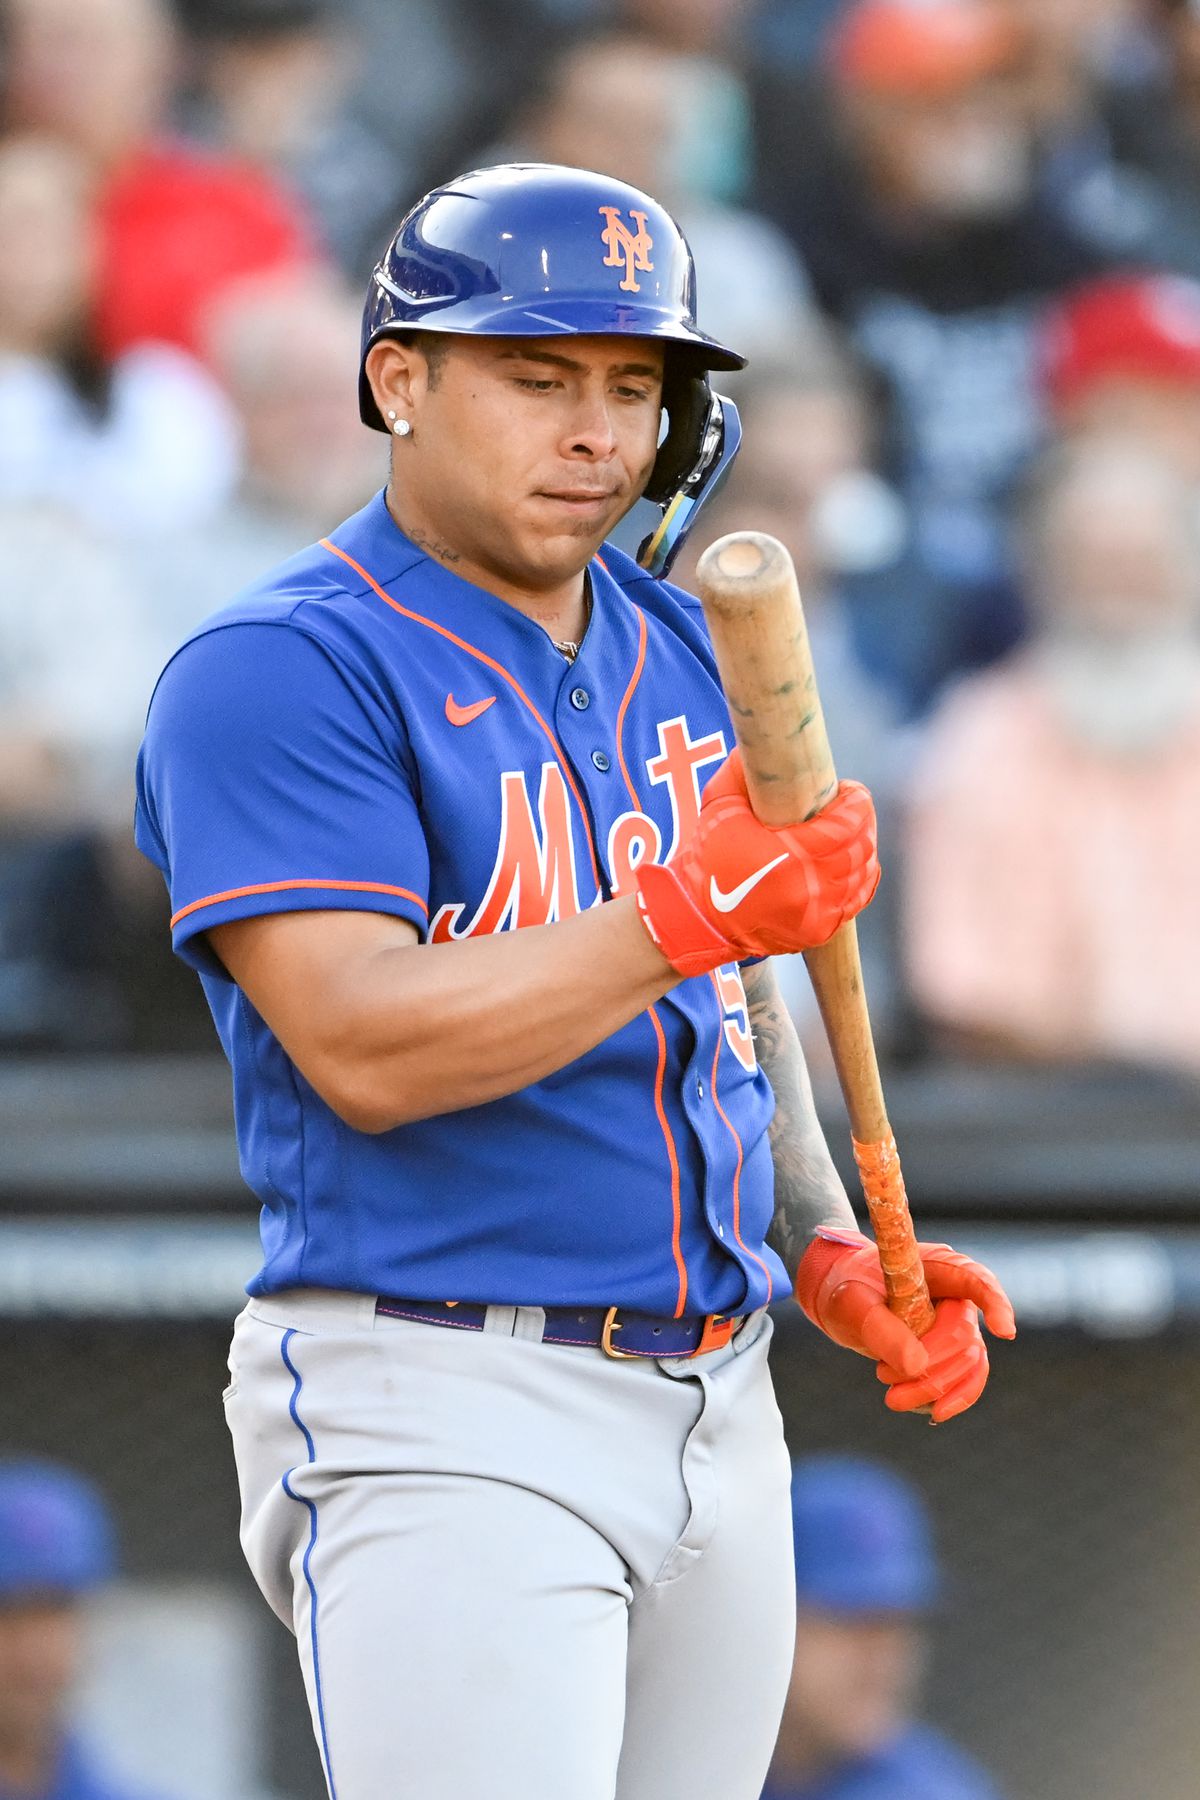 Francisco Alvarez #50 of the New York Mets bats during the second inning of a spring training game against the Washington Nationals at The Ballpark of the Palm Beaches on March 20, 2023 in West Palm Beach, Florida.